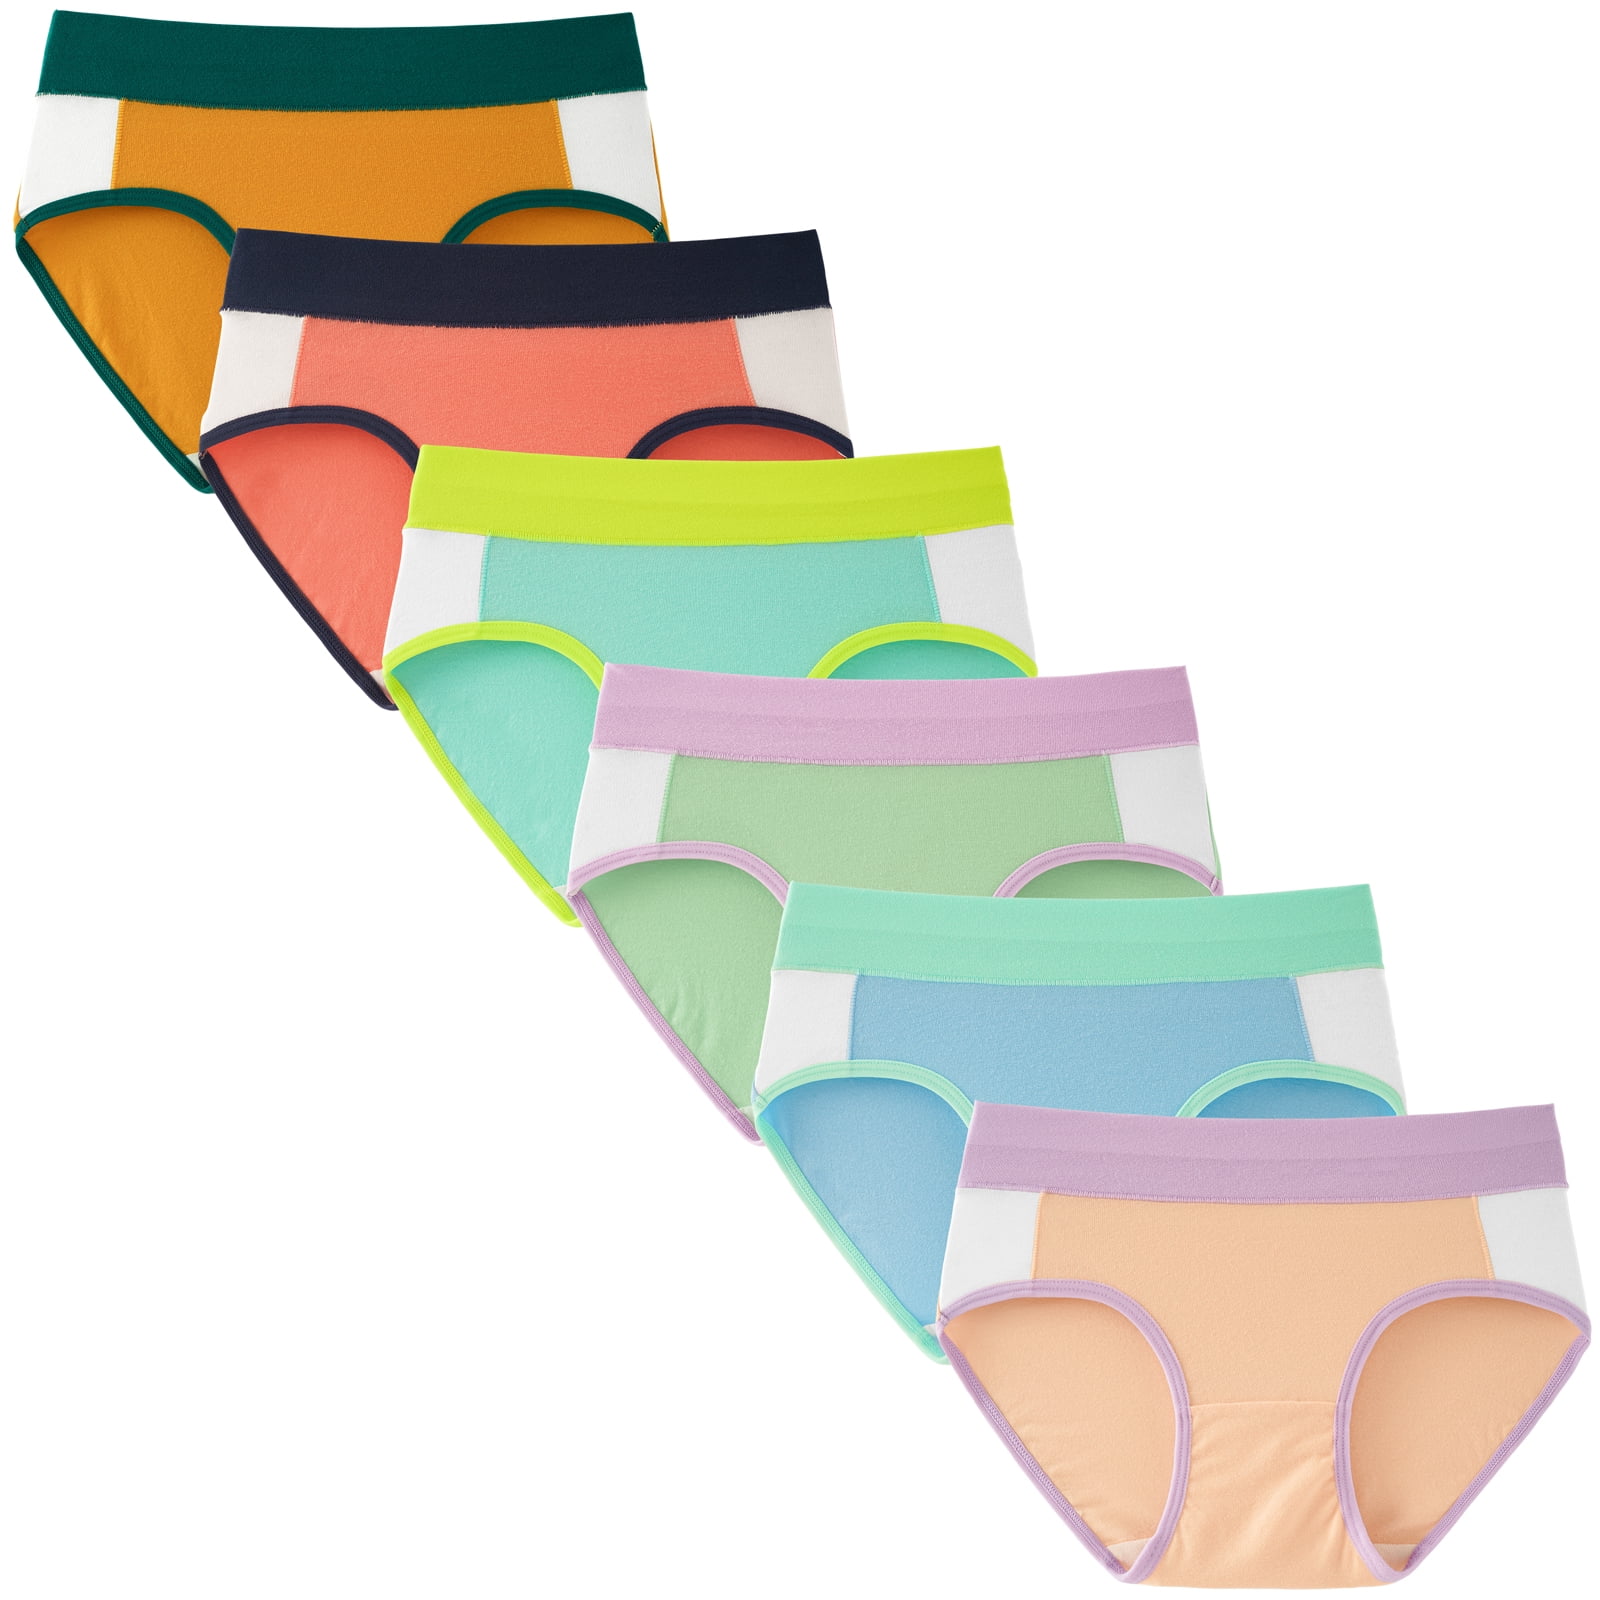 INNERSY Girls Underwear Cotton Briefs Panties for Teens 6- Pack (XL(14-16  yrs), Stripe& Colors) 